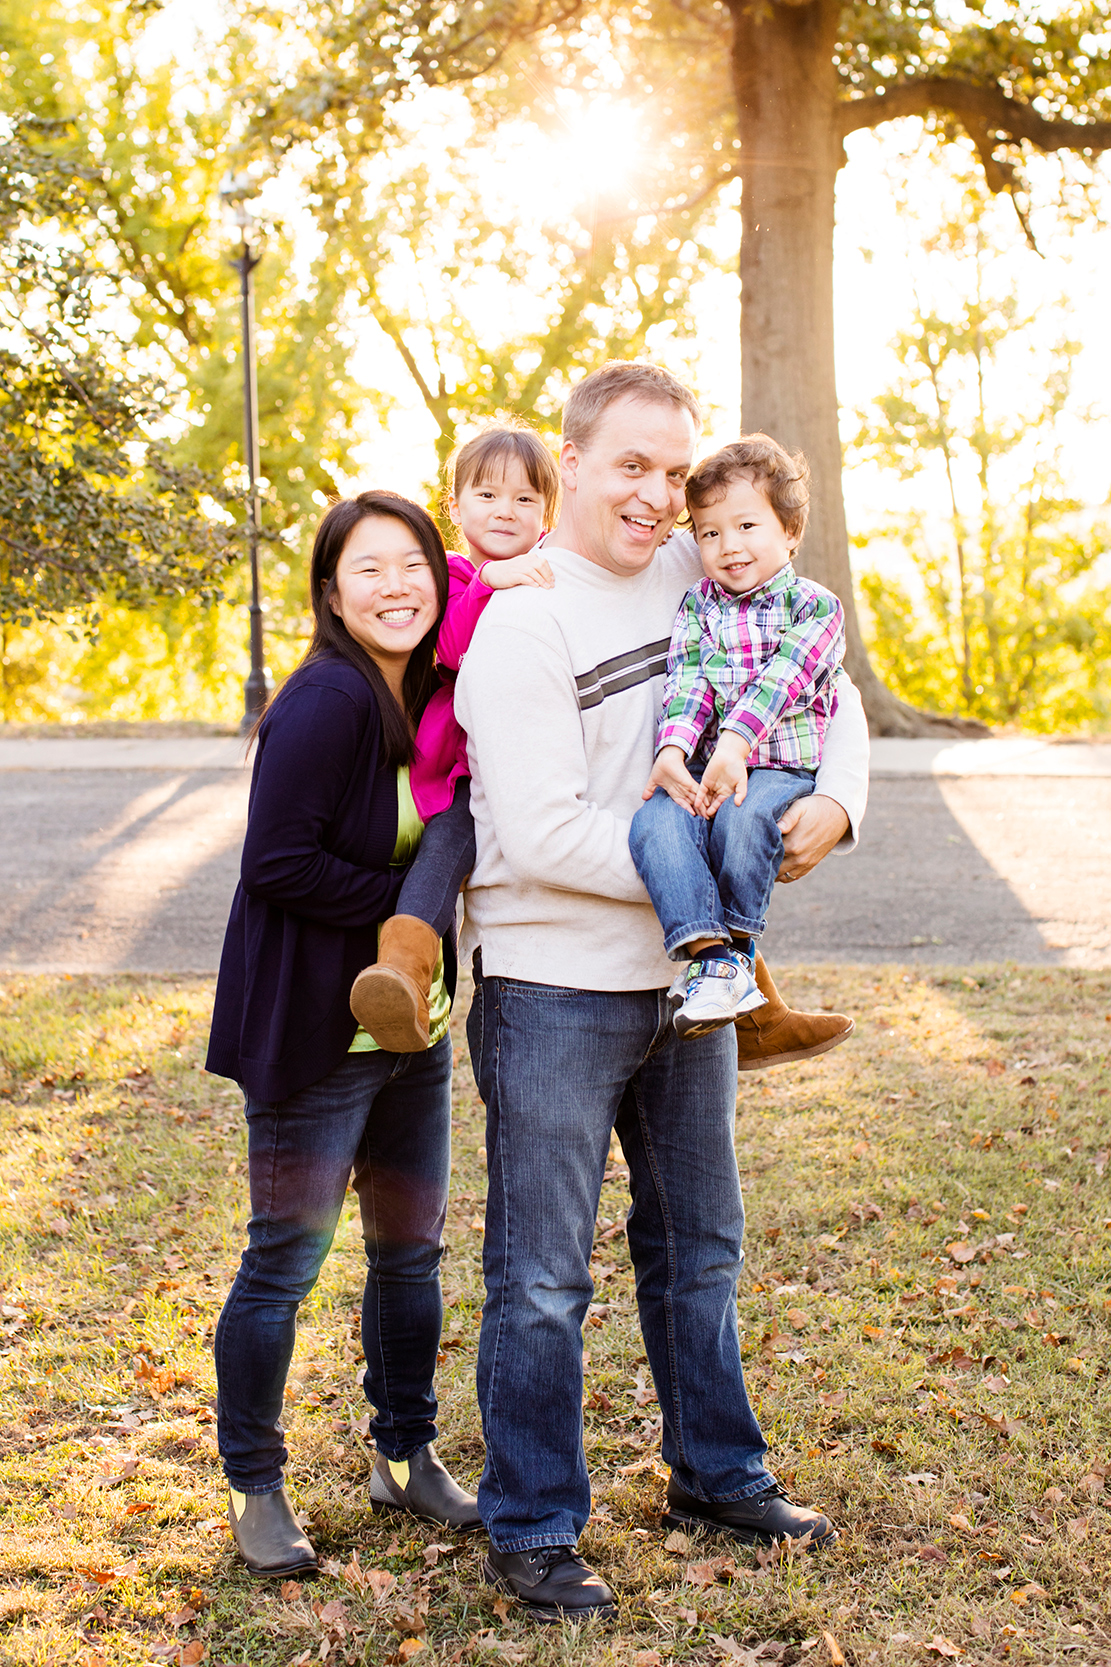 Fun Family of Four Fall Photos at Libby Hill Park - Image Property of www.j-dphoto.com